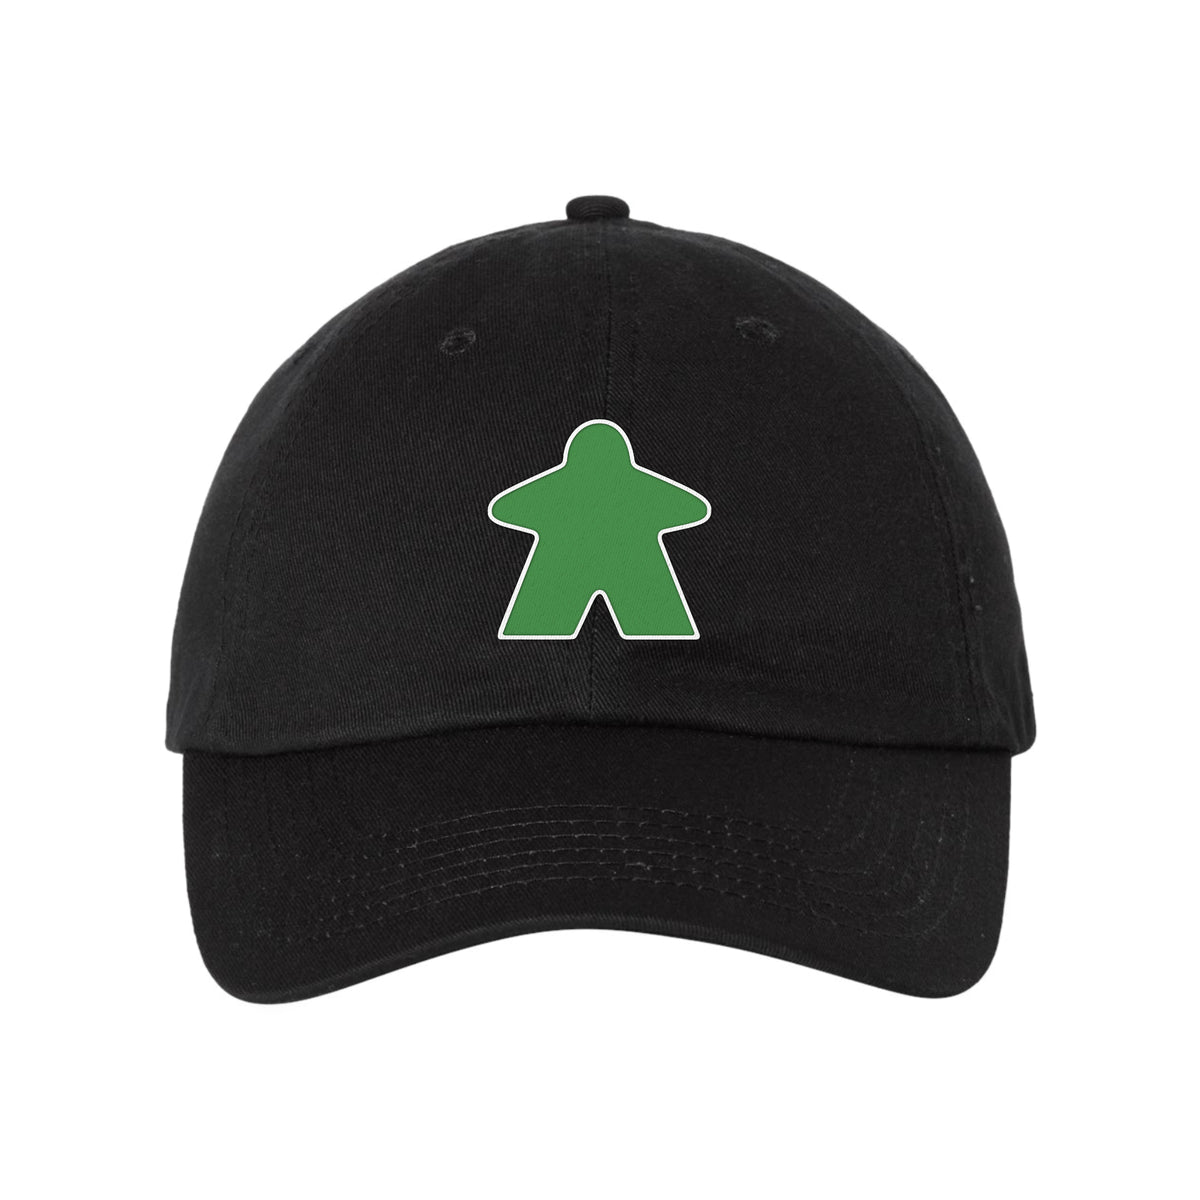 Green Meeple Board Game Curved Bill Hat